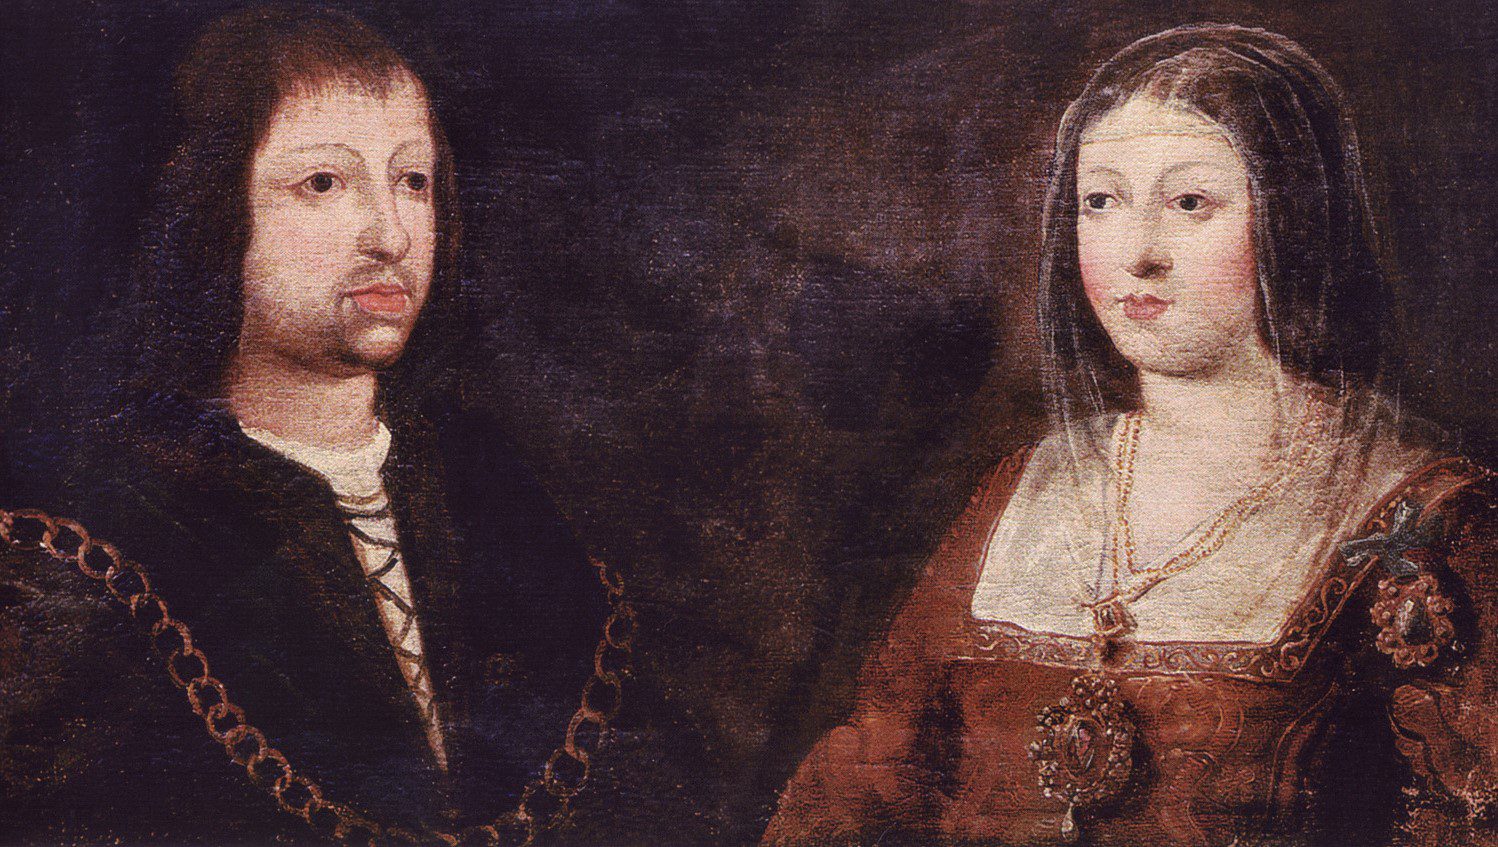 Anonymous, "Wedding portrait of the Catholic Monarchs, King Ferdinand of Aragon and Queen Isabella of Castile" (15th century) (Credit: Wikimedia)